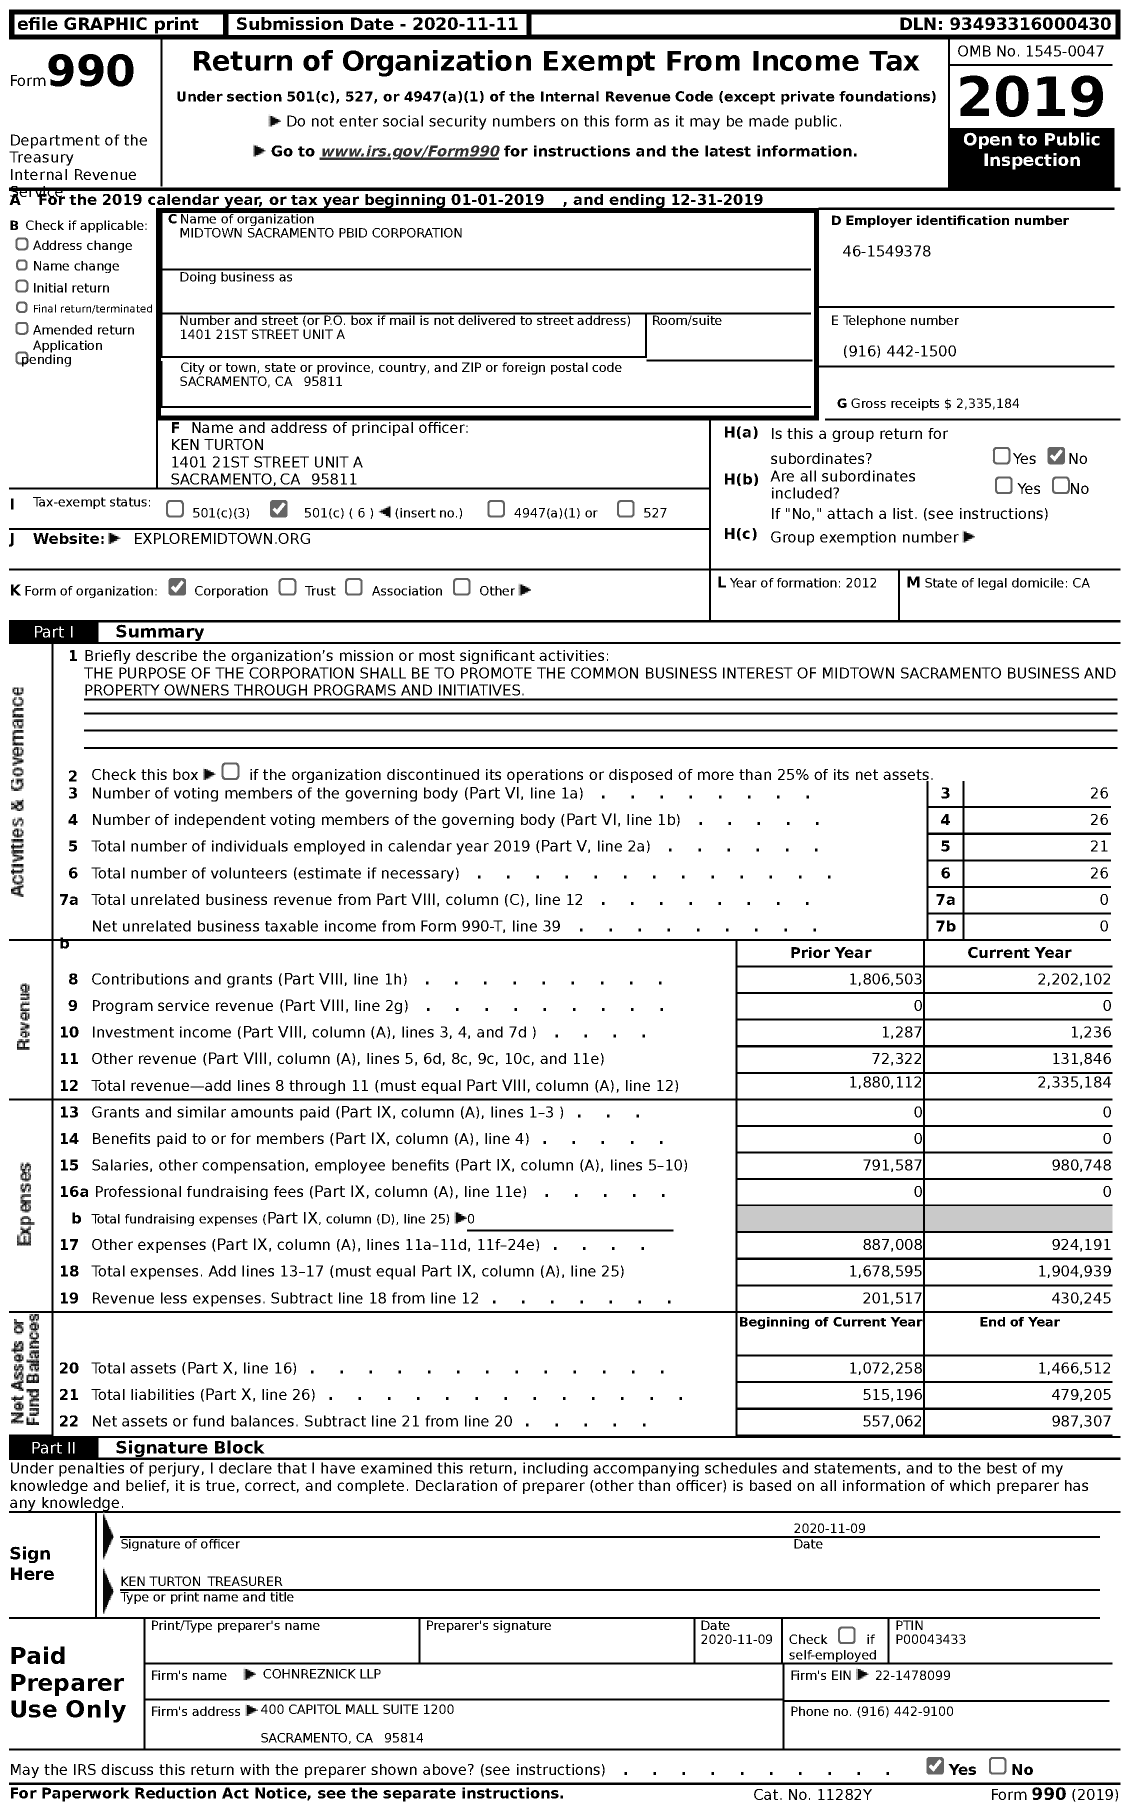 Image of first page of 2019 Form 990 for Midtown Sacramento PBID Corporation